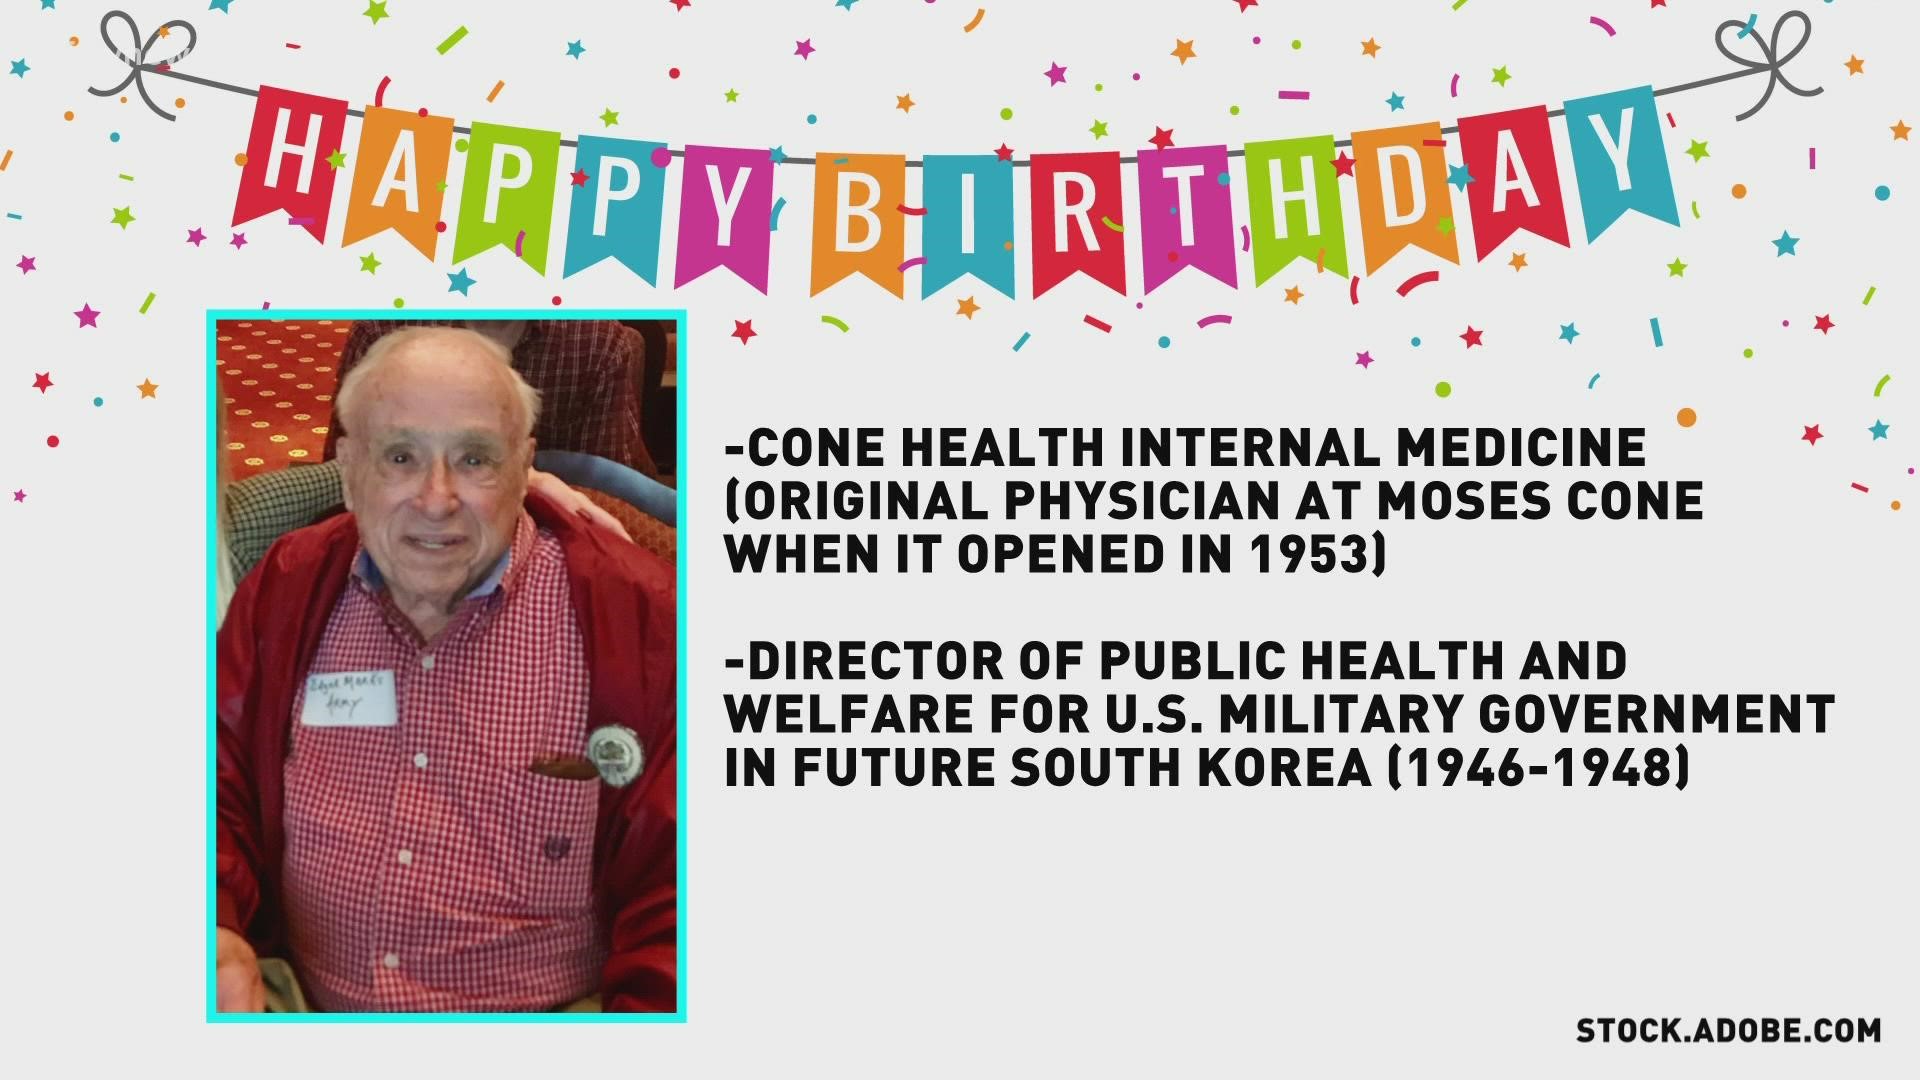 Dr. Edgar Marks was one of the original physicians at Moses Cone Hospital and served in Korea between wars. At age 100, he is as sharp as a tack.